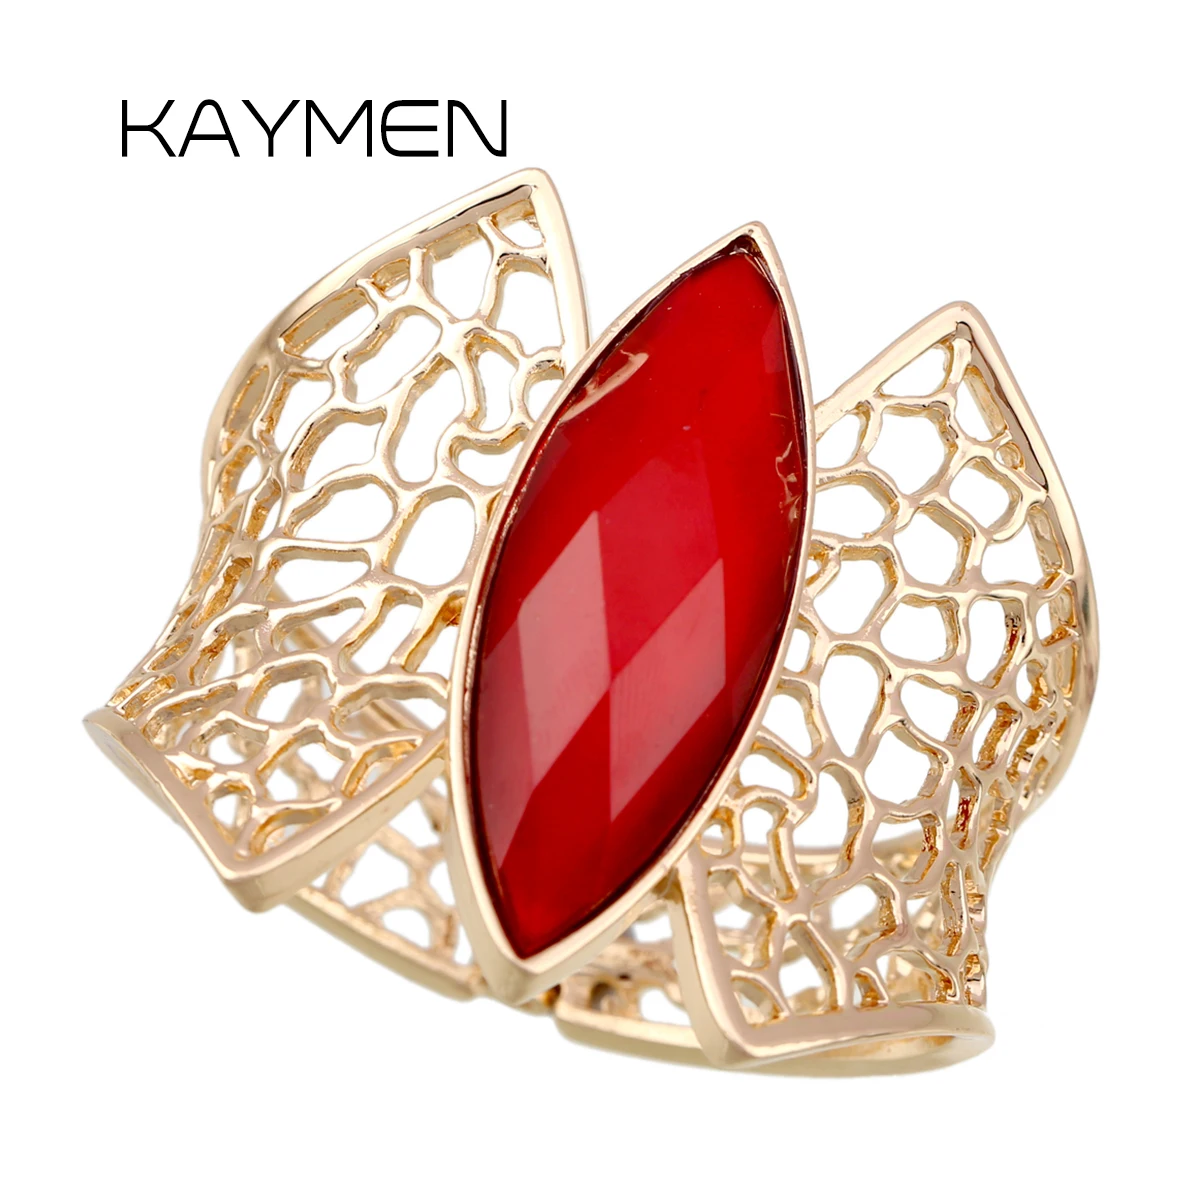 

Kaymen Jewelry Women's Fashion Gold Plated Hollow Out Shape Inlaid Resin Stone Statement Cuff Bracelet Bangle for Party Wedding